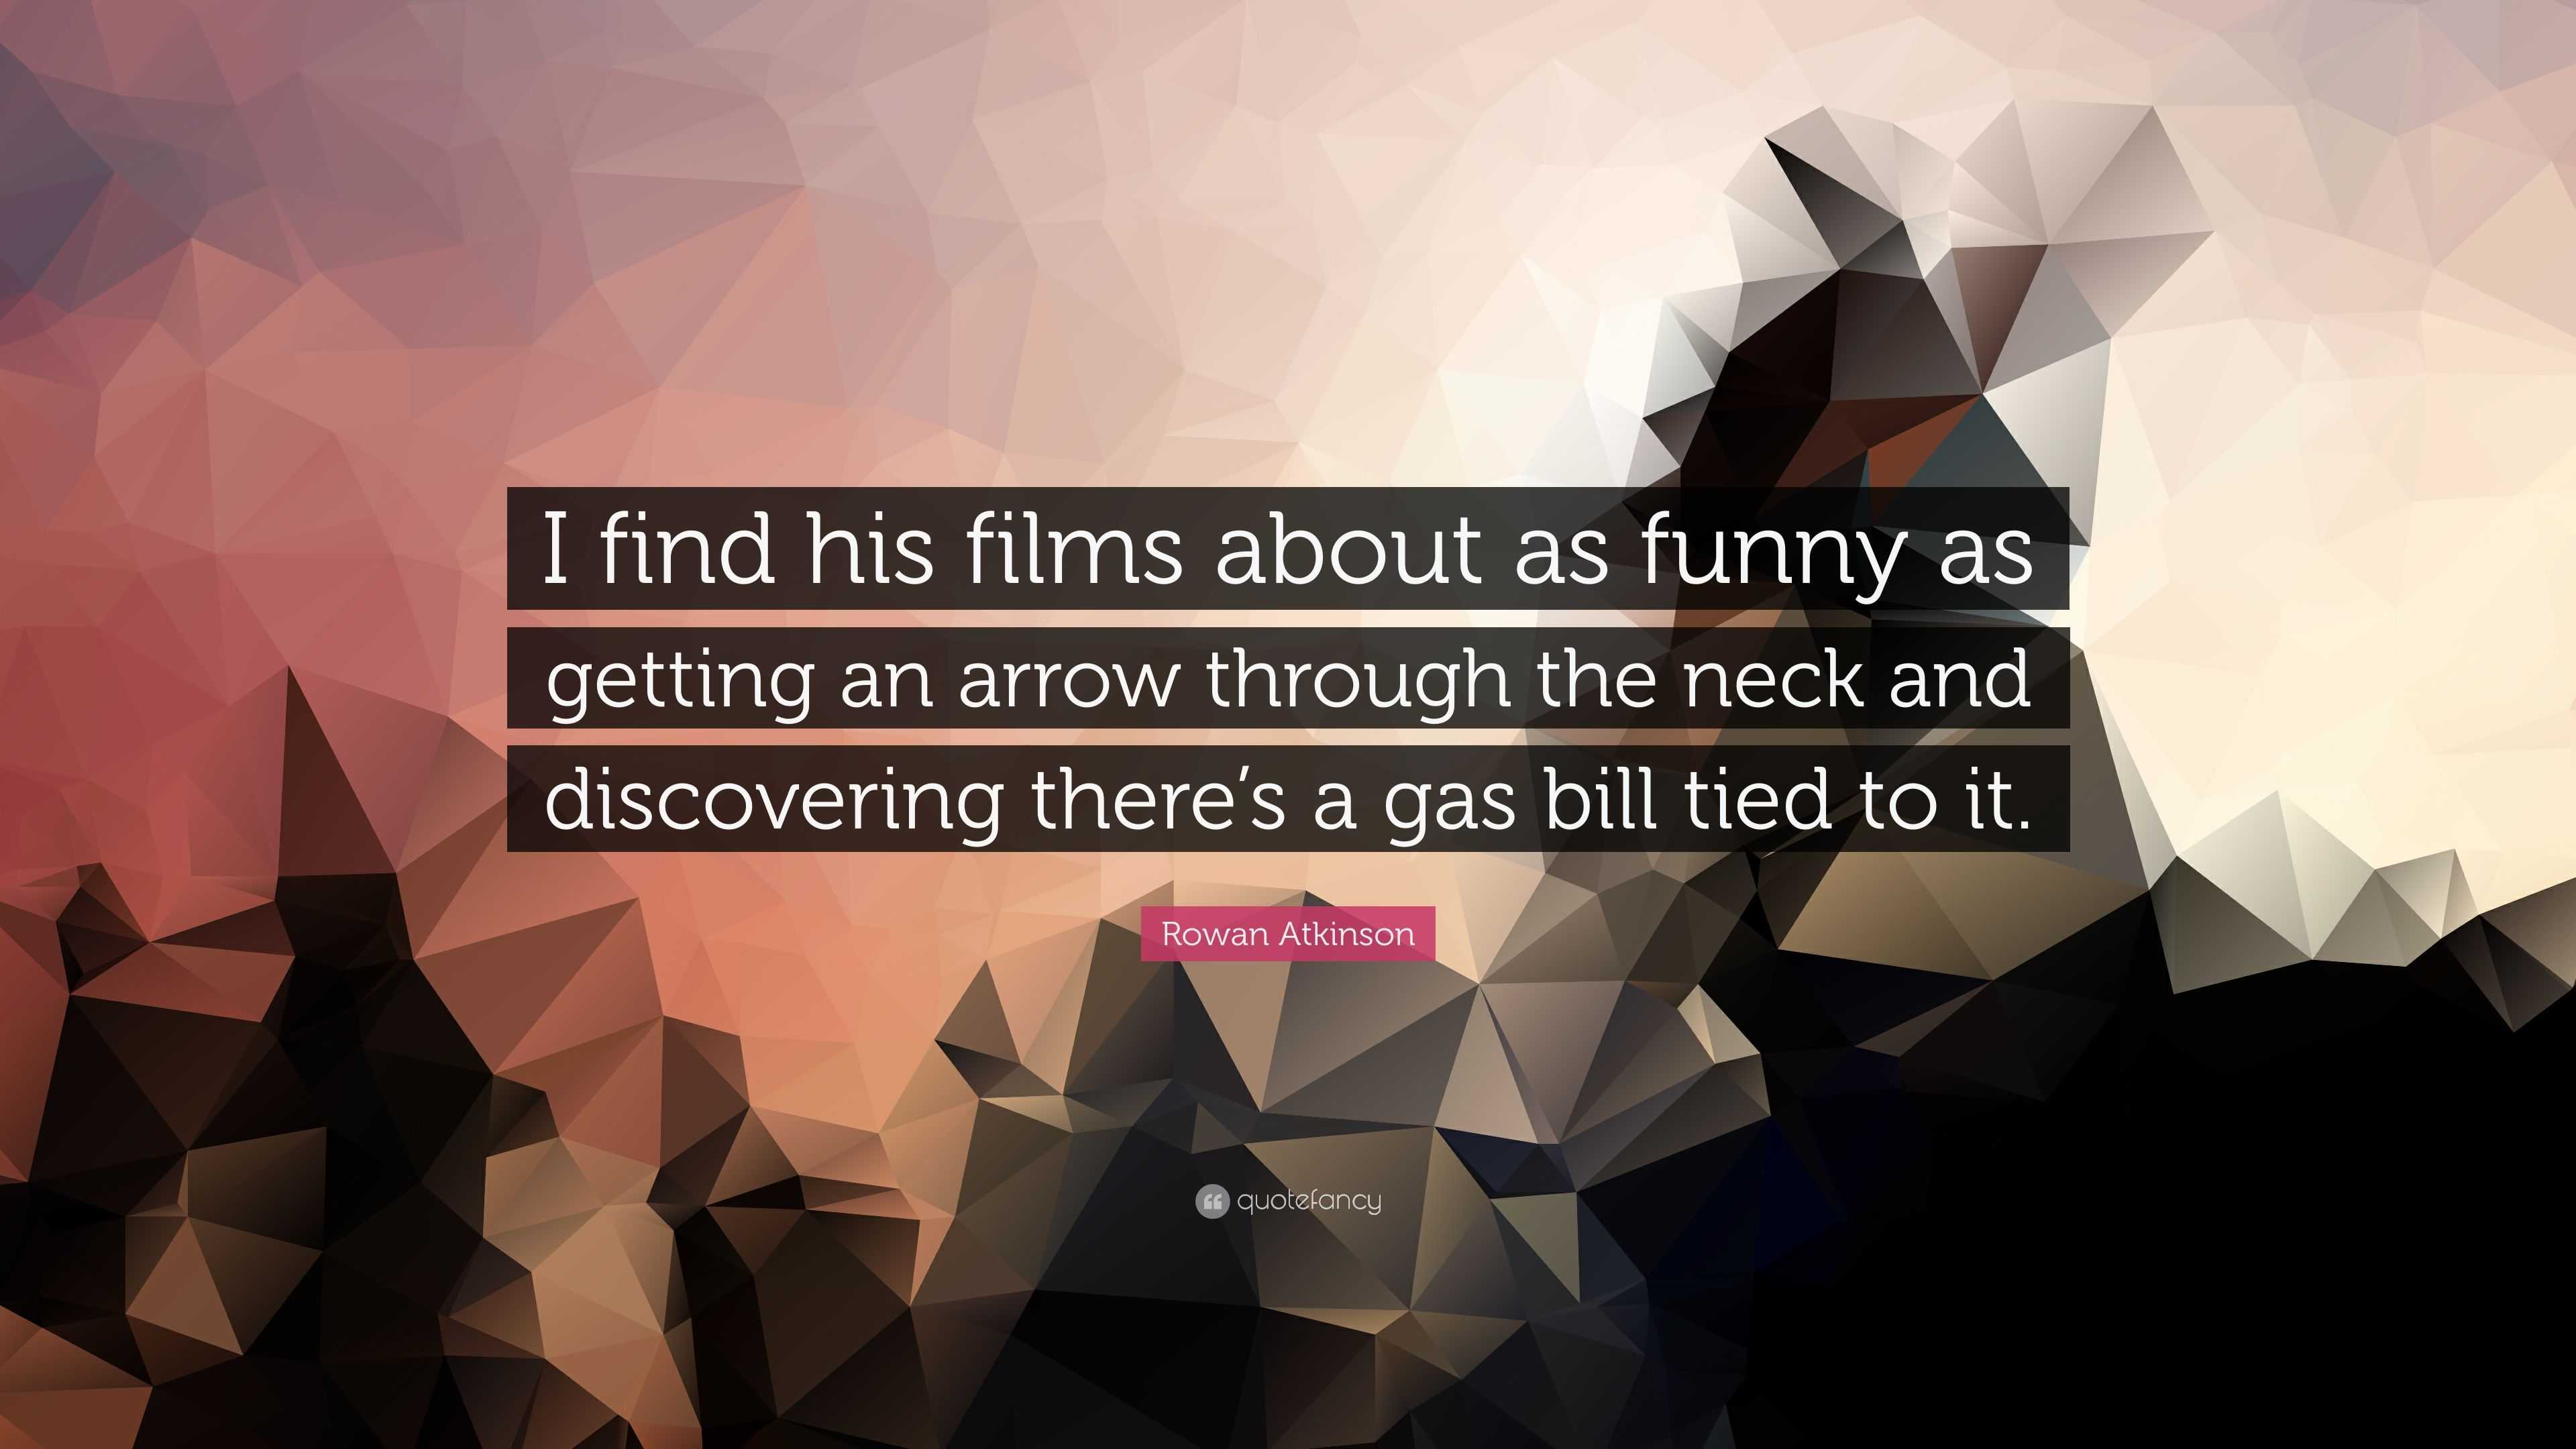 Rowan Atkinson Quote: “I find his films about as funny as getting an arrow  through the